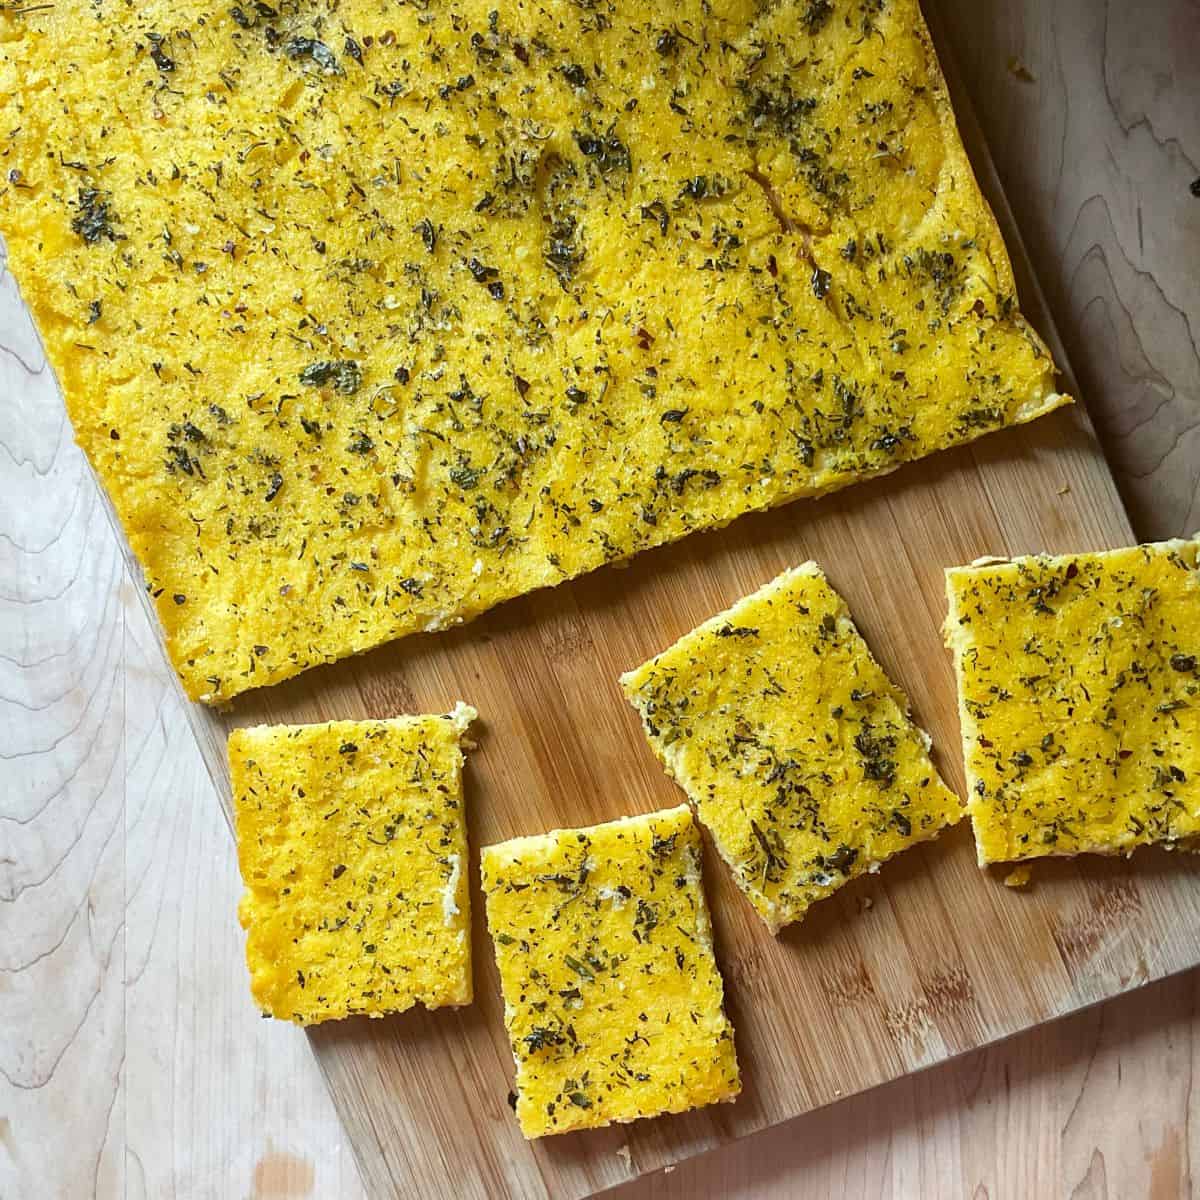 A few pieces of polenta pizza with herbs on a wooden board.